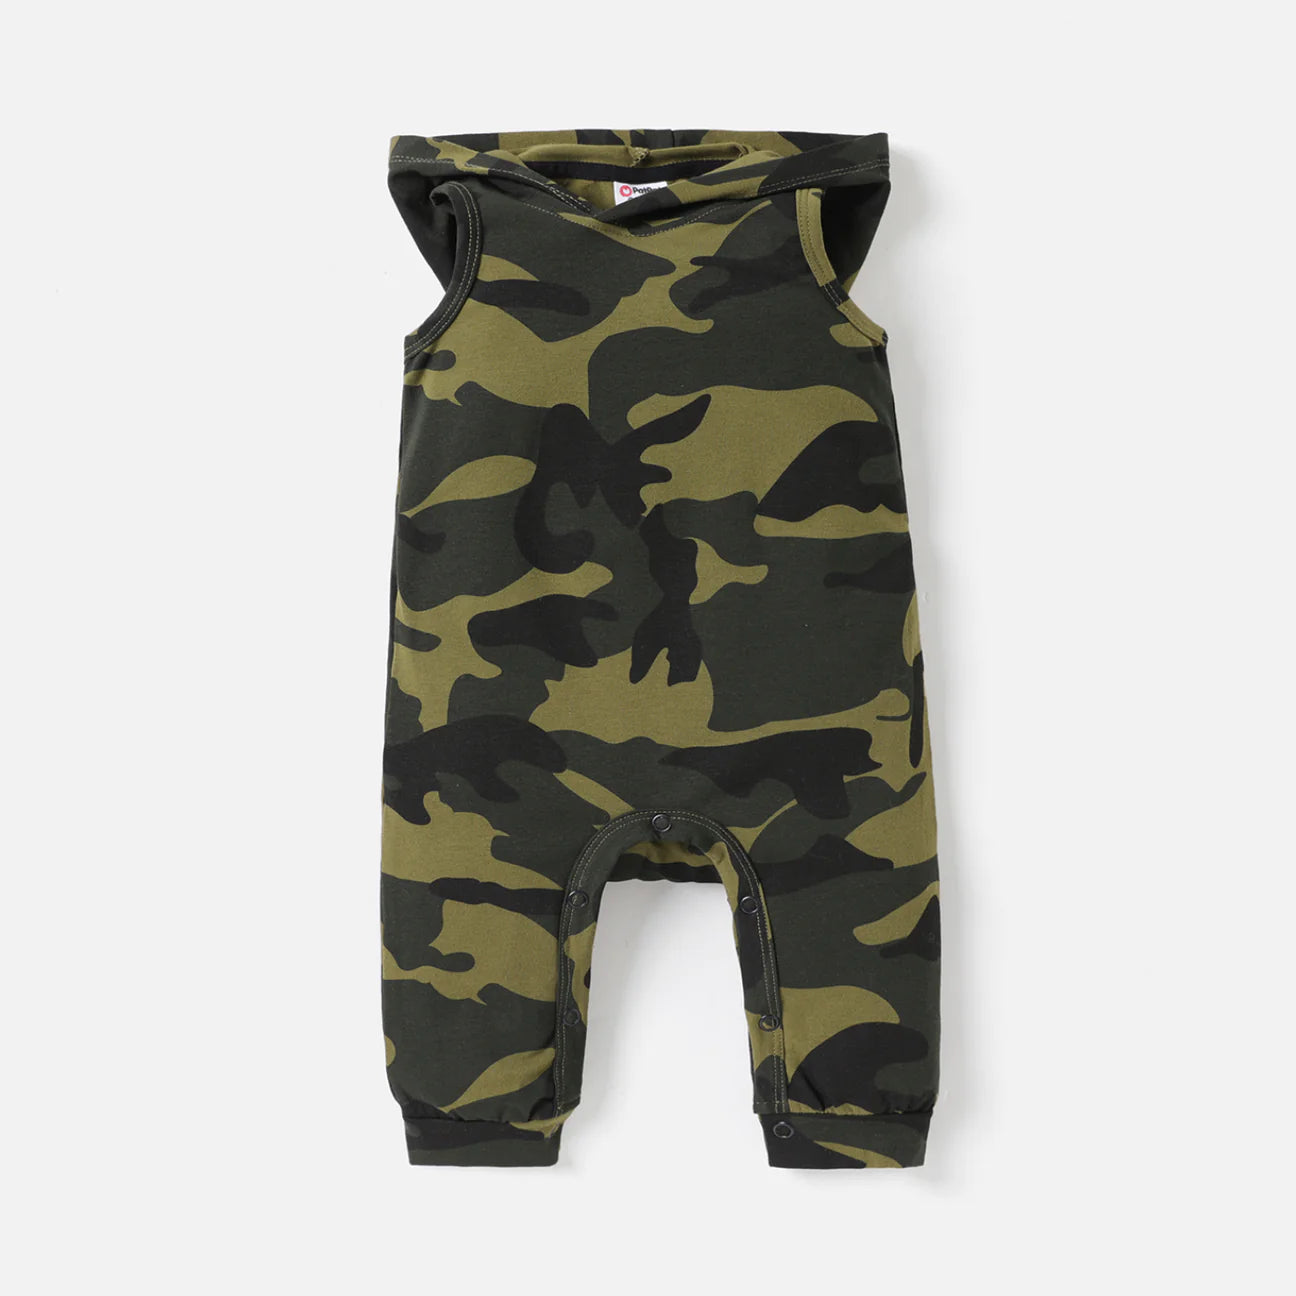 Hooded Camouflage Cutoff Romper